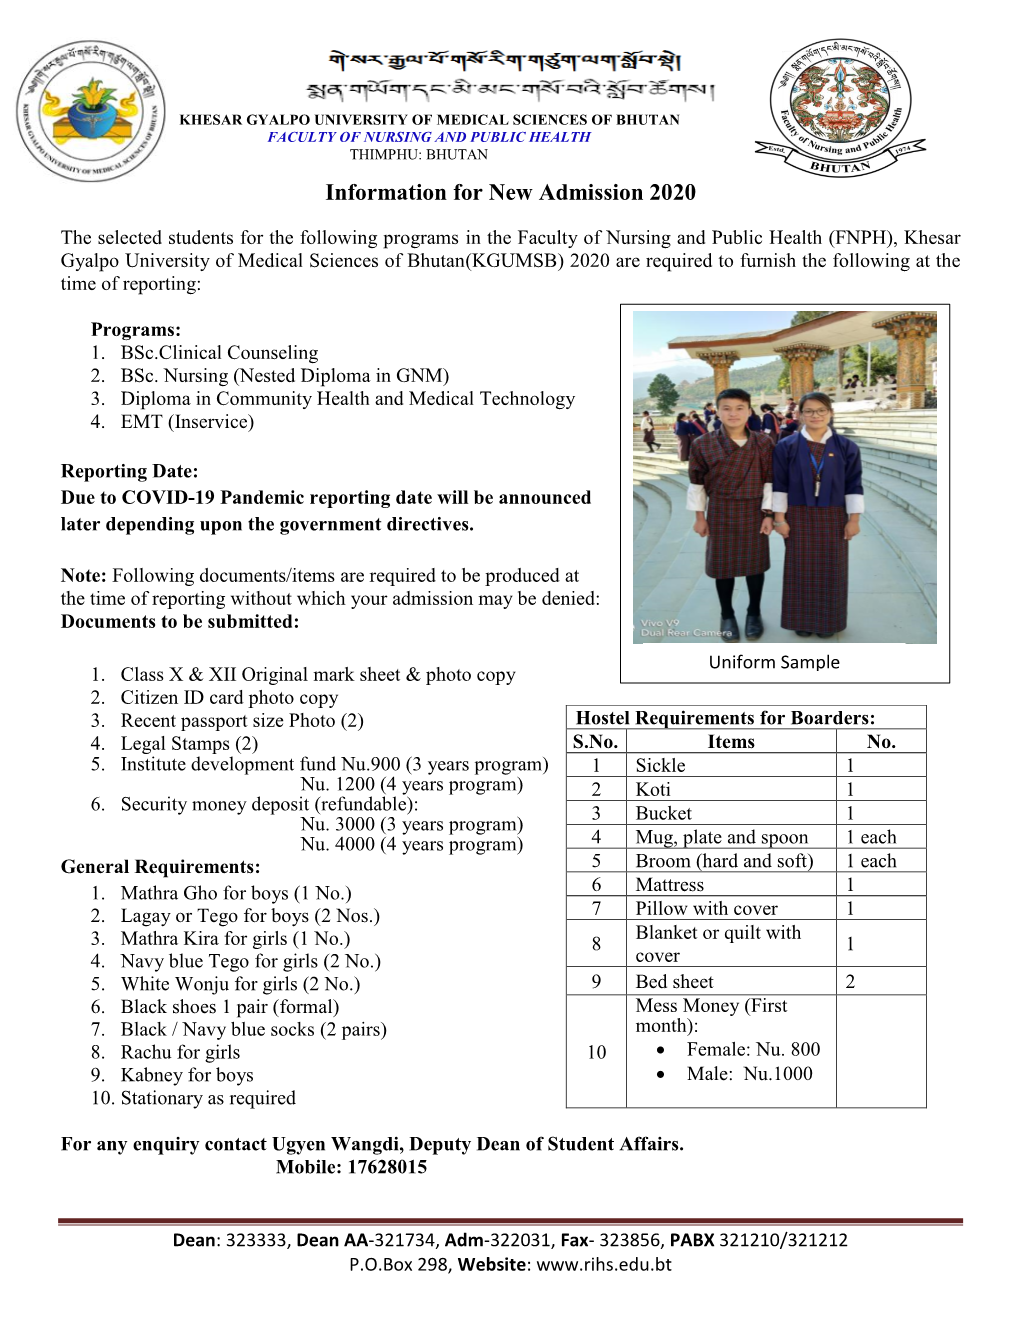 Information for New Admission 2020